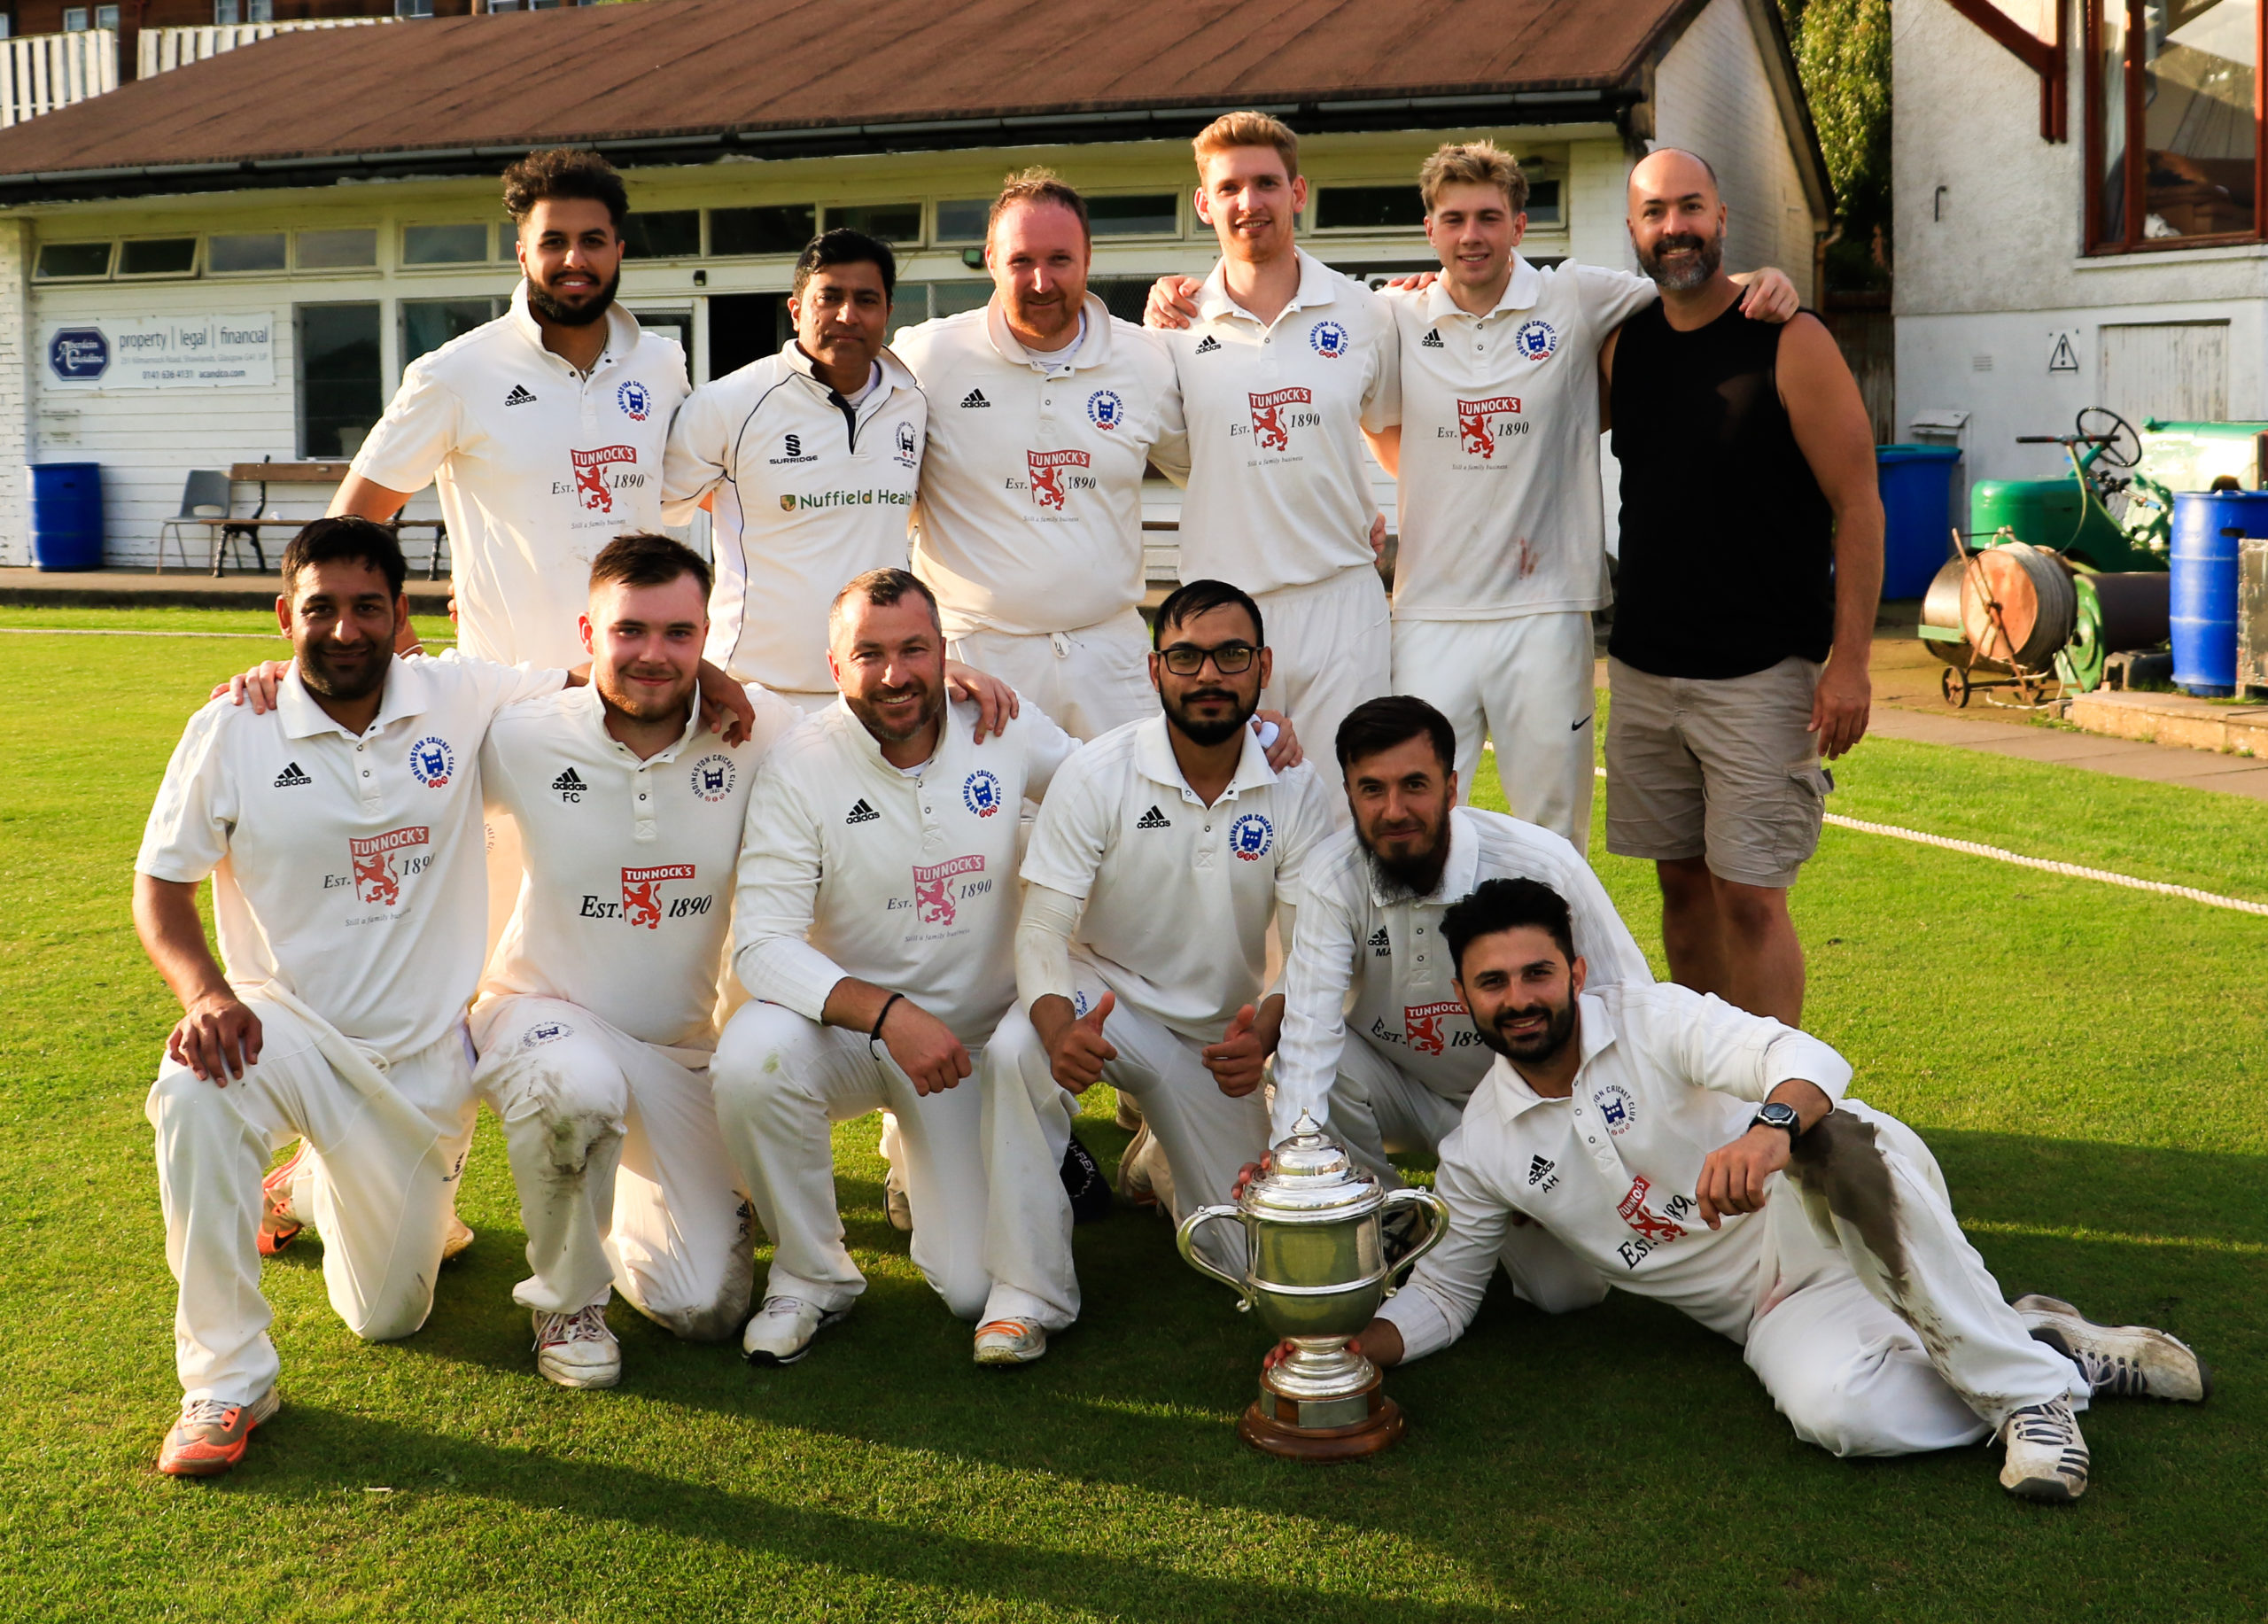 Uddingston looking forward to the chance to defend their crown